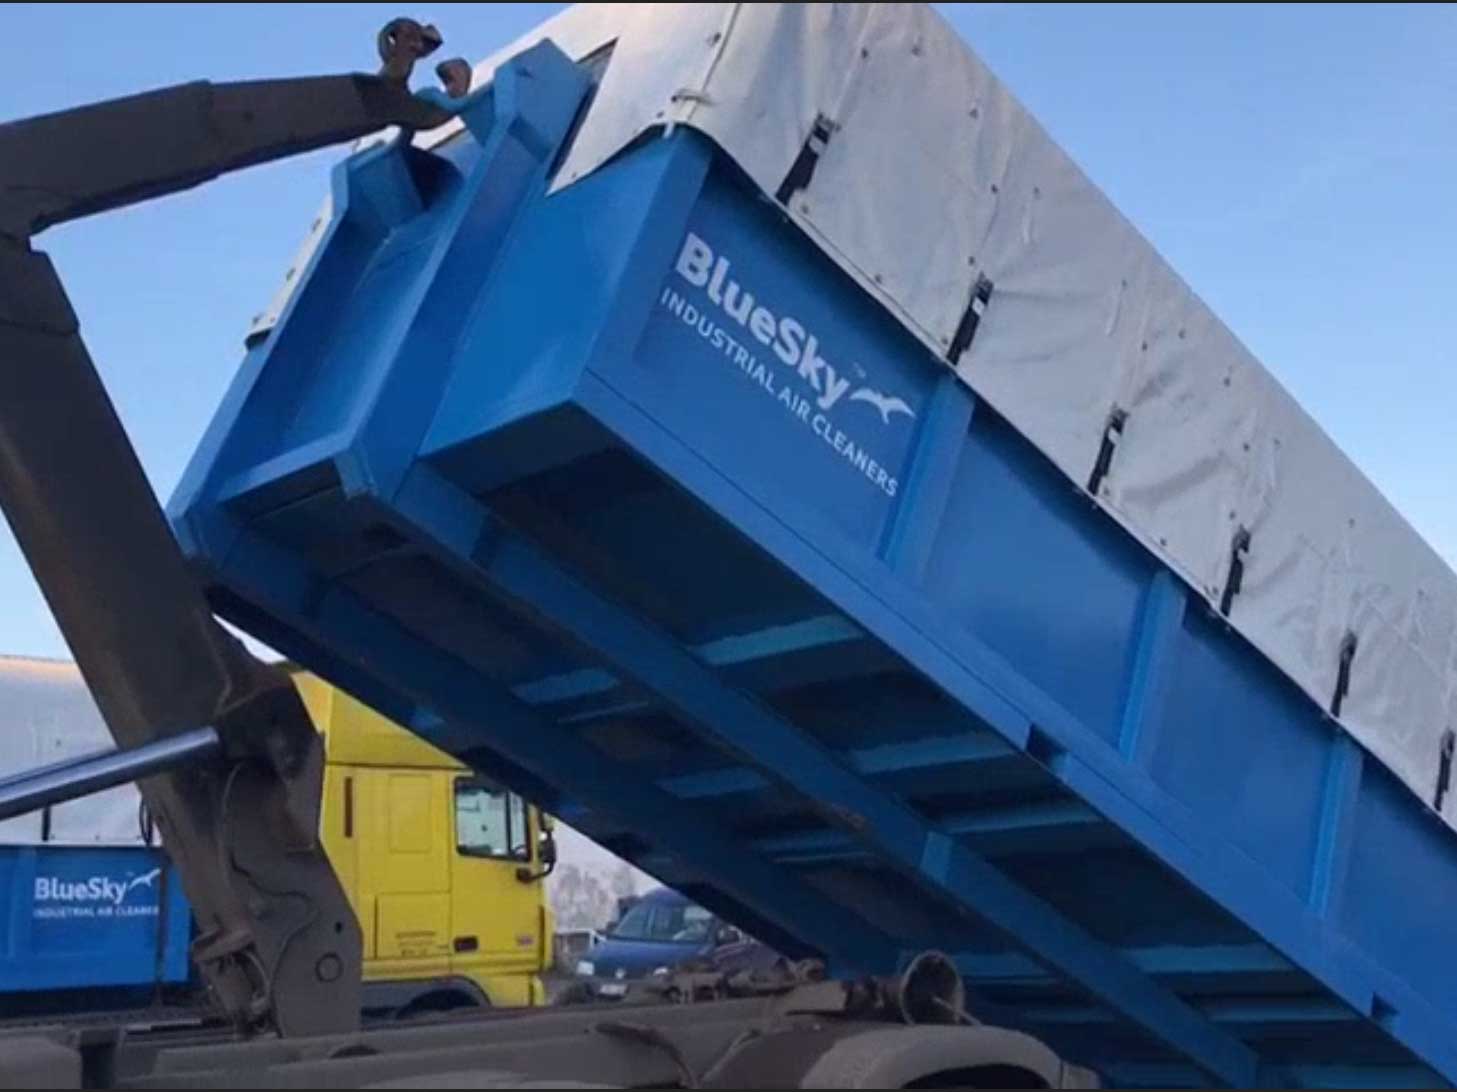 Lead dustcollector delivered by BlueSky